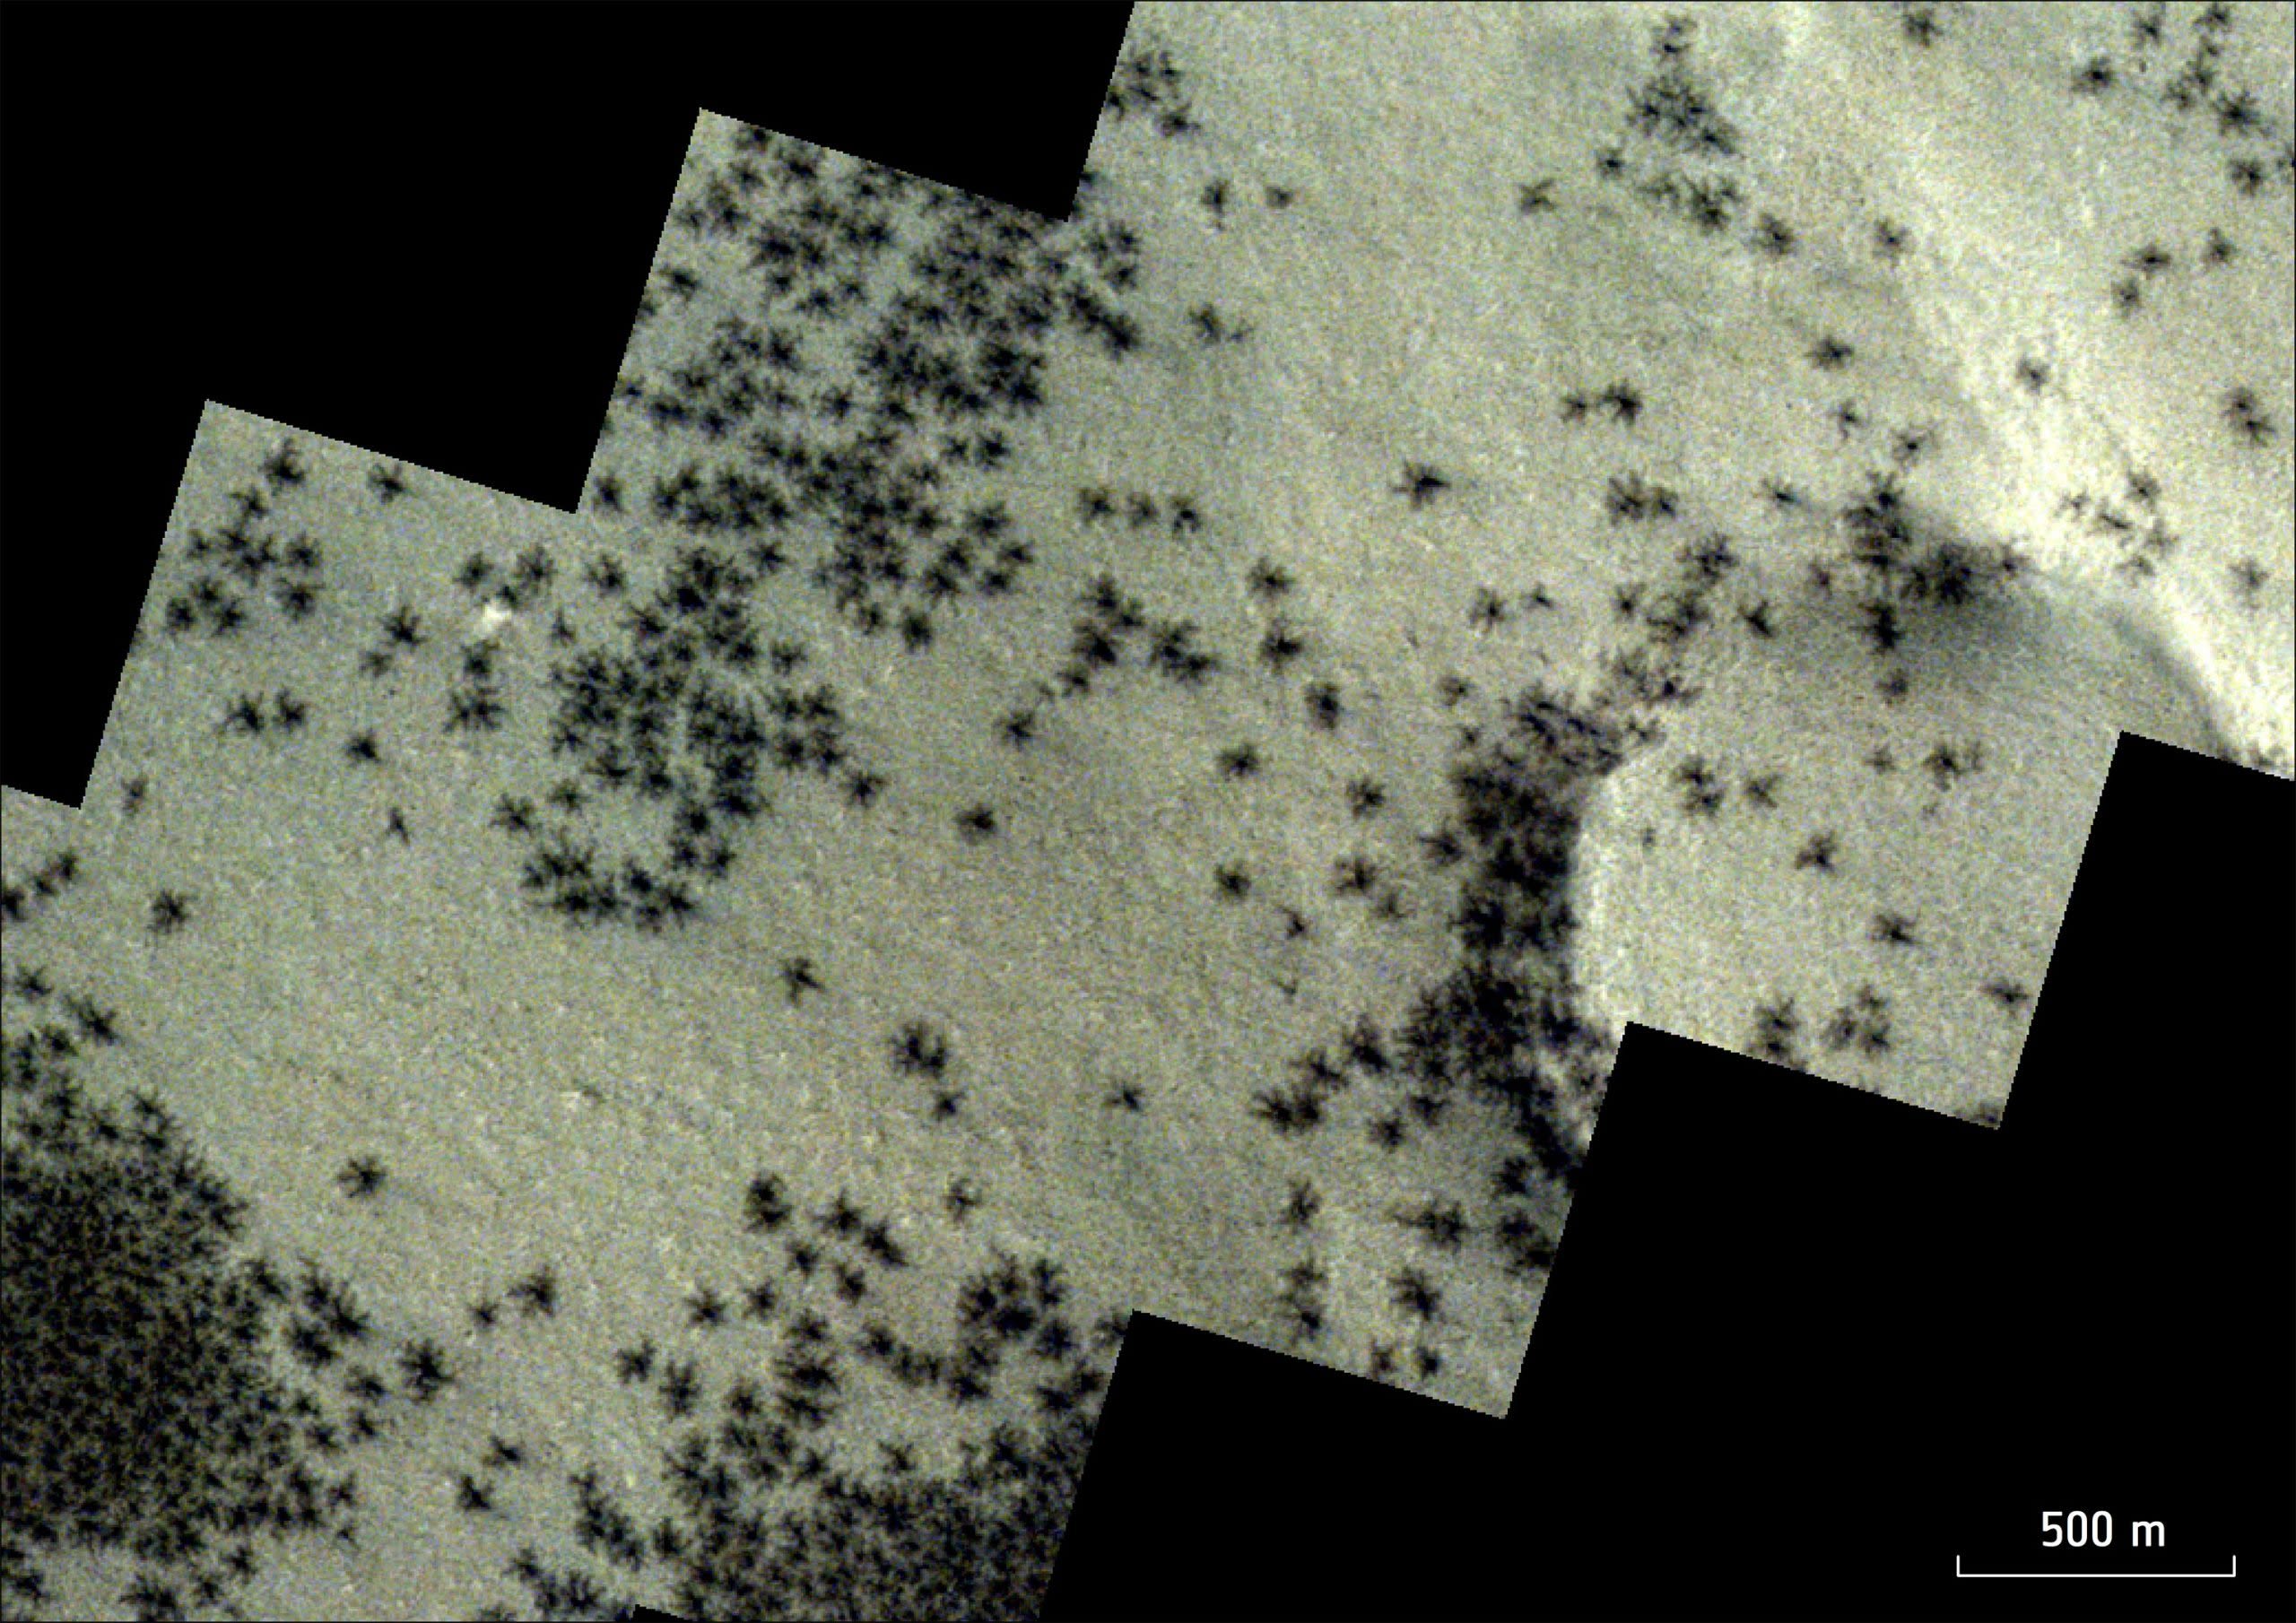 Mars Express Discovers Mysterious Martian “Spiders”